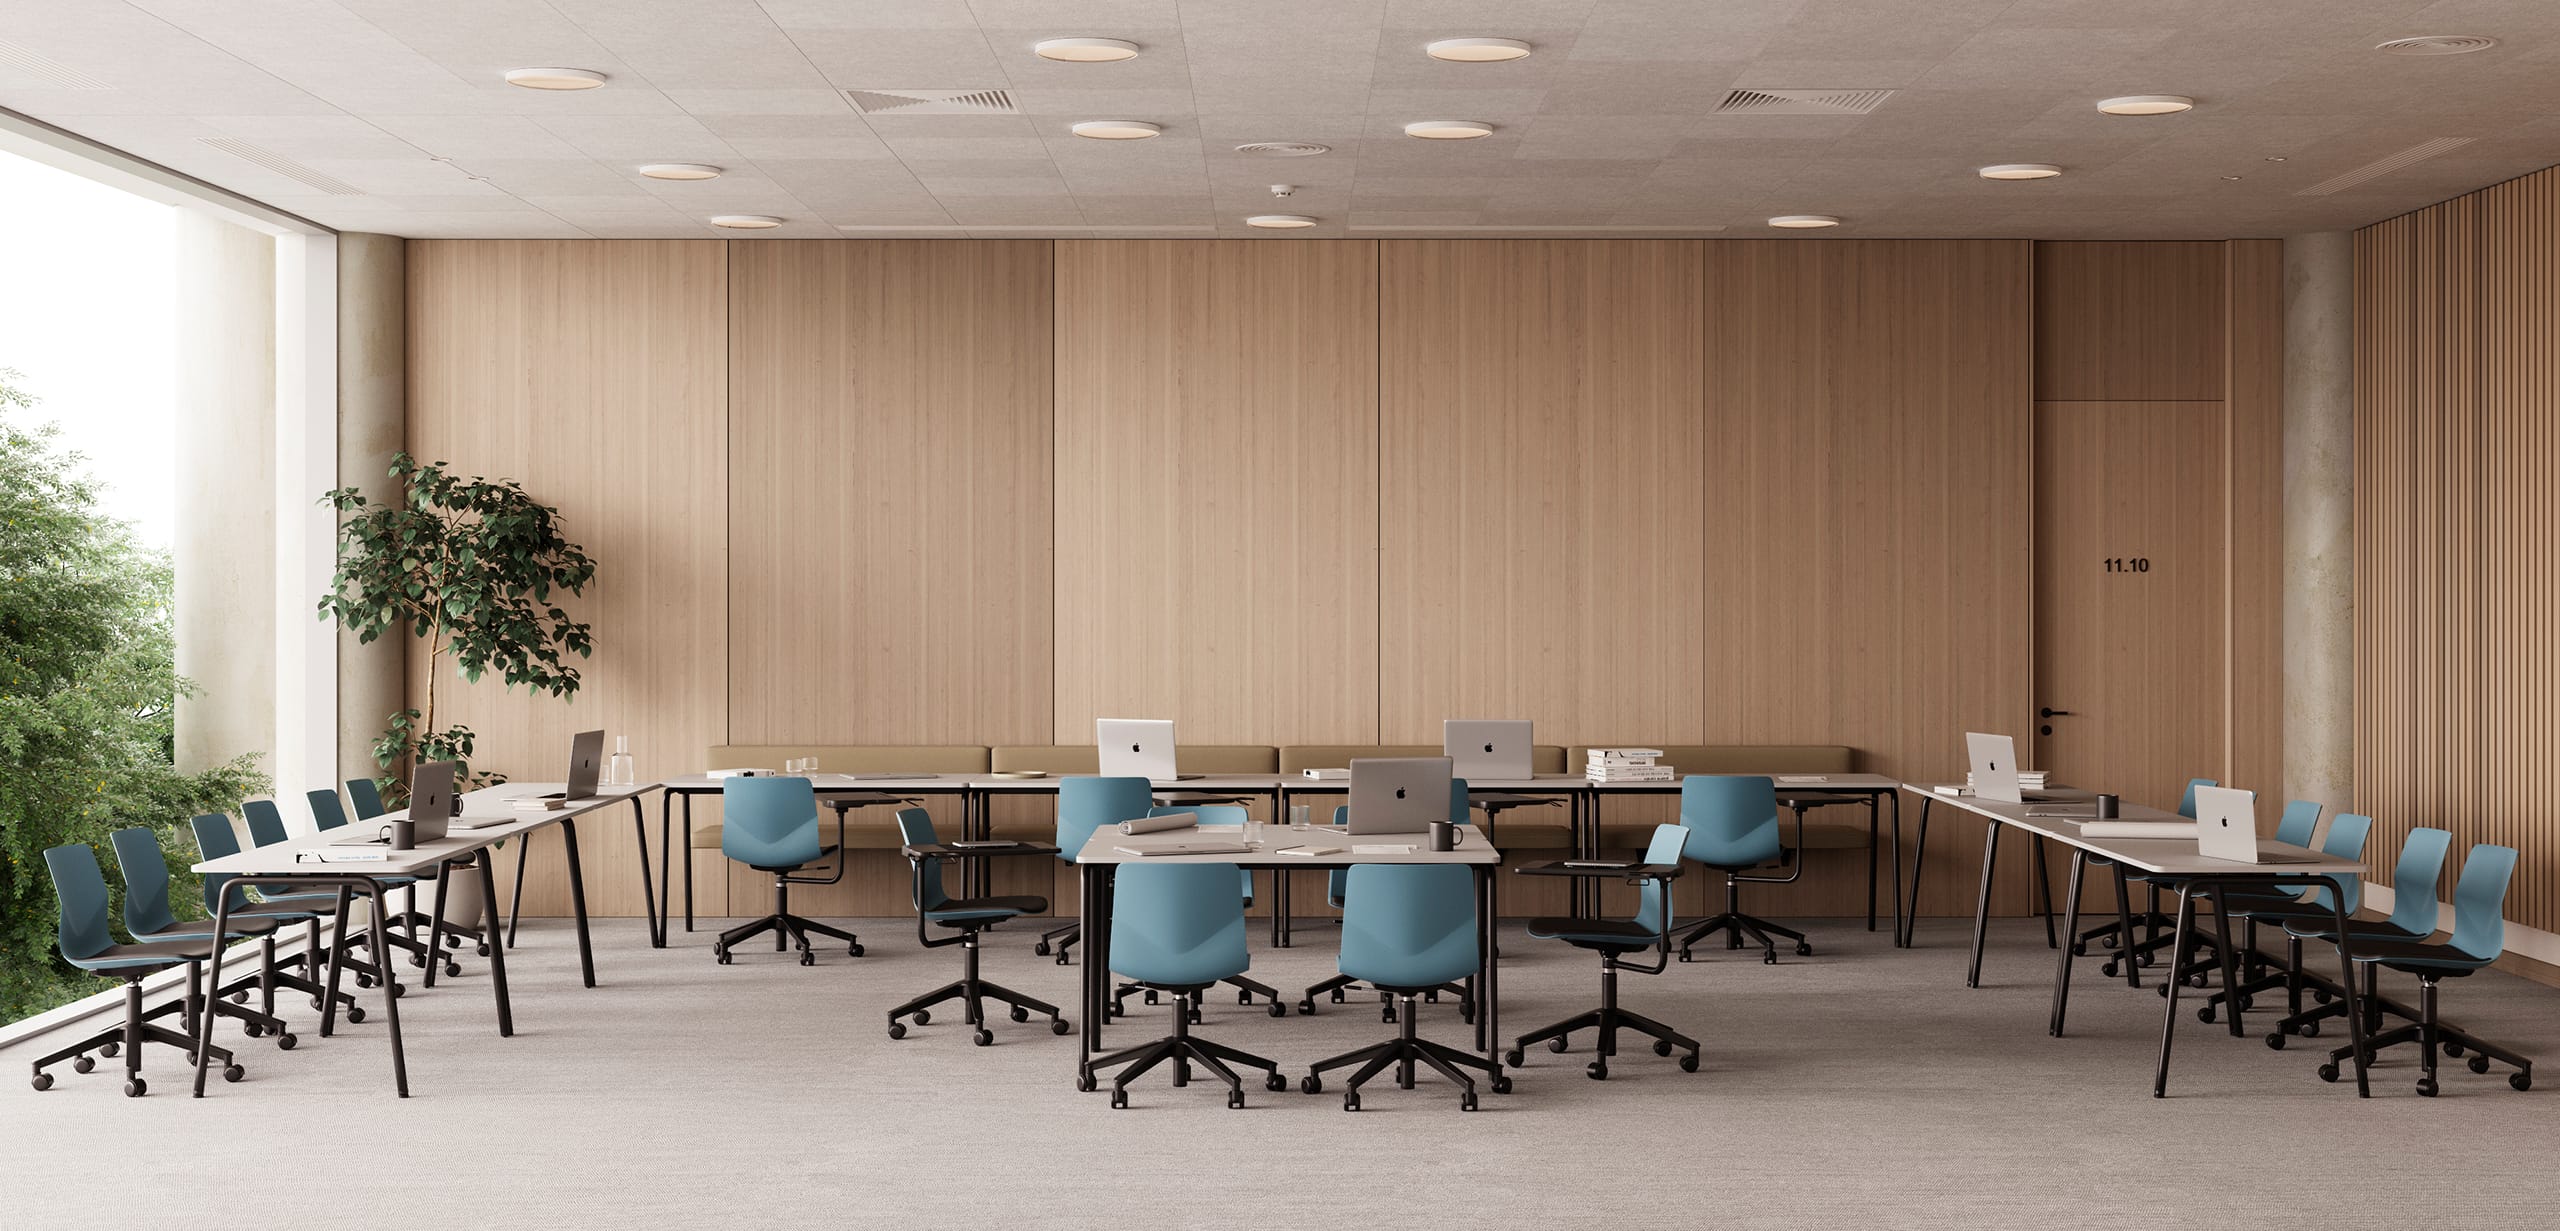 A room with blue office desk chairs, office tables and wooden walls.